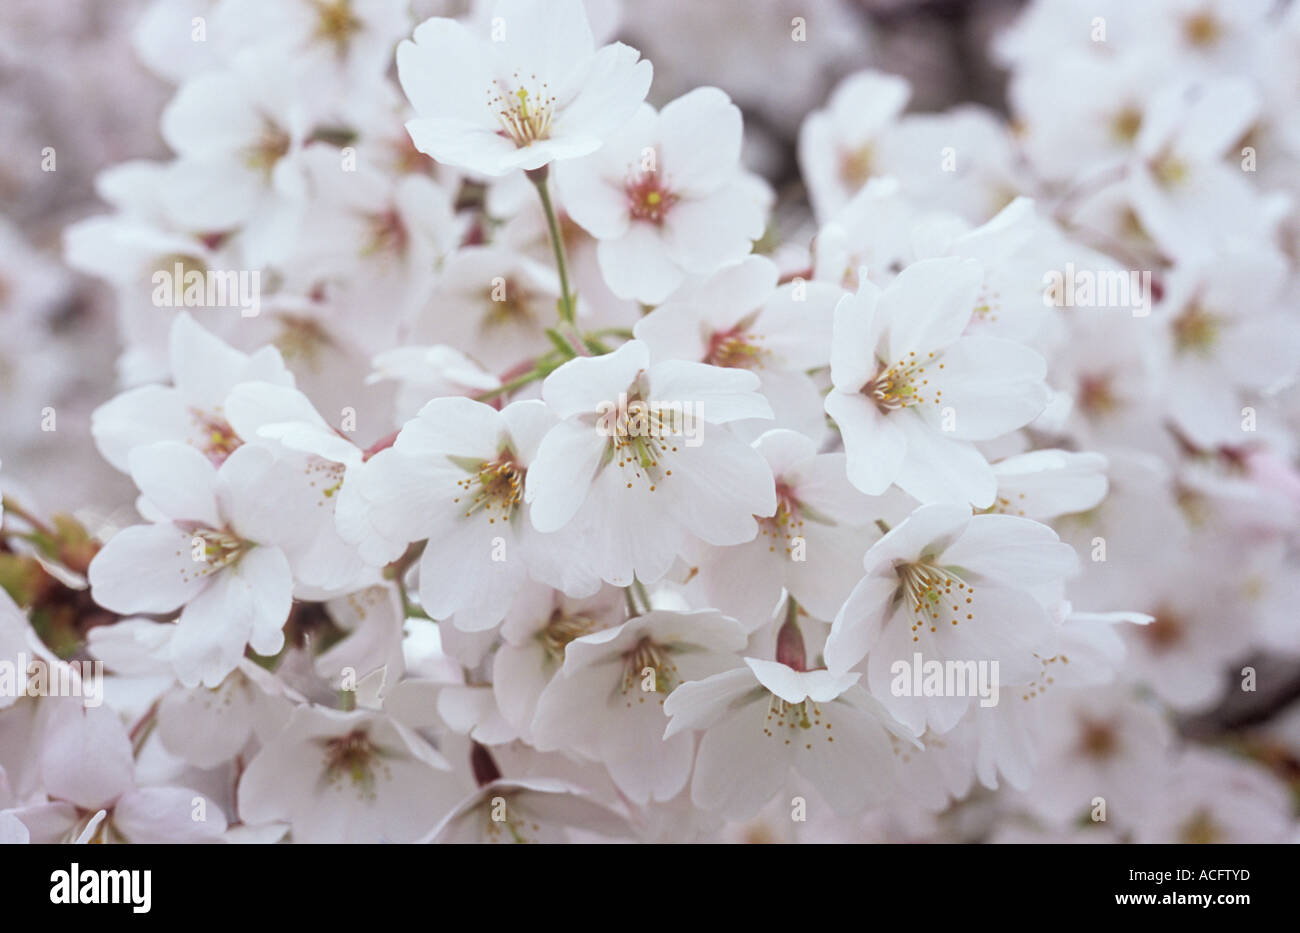 Close up of cluster of the early spring white flowers of the Flowering Fuji cherry or Prunus incisa tree Stock Photo